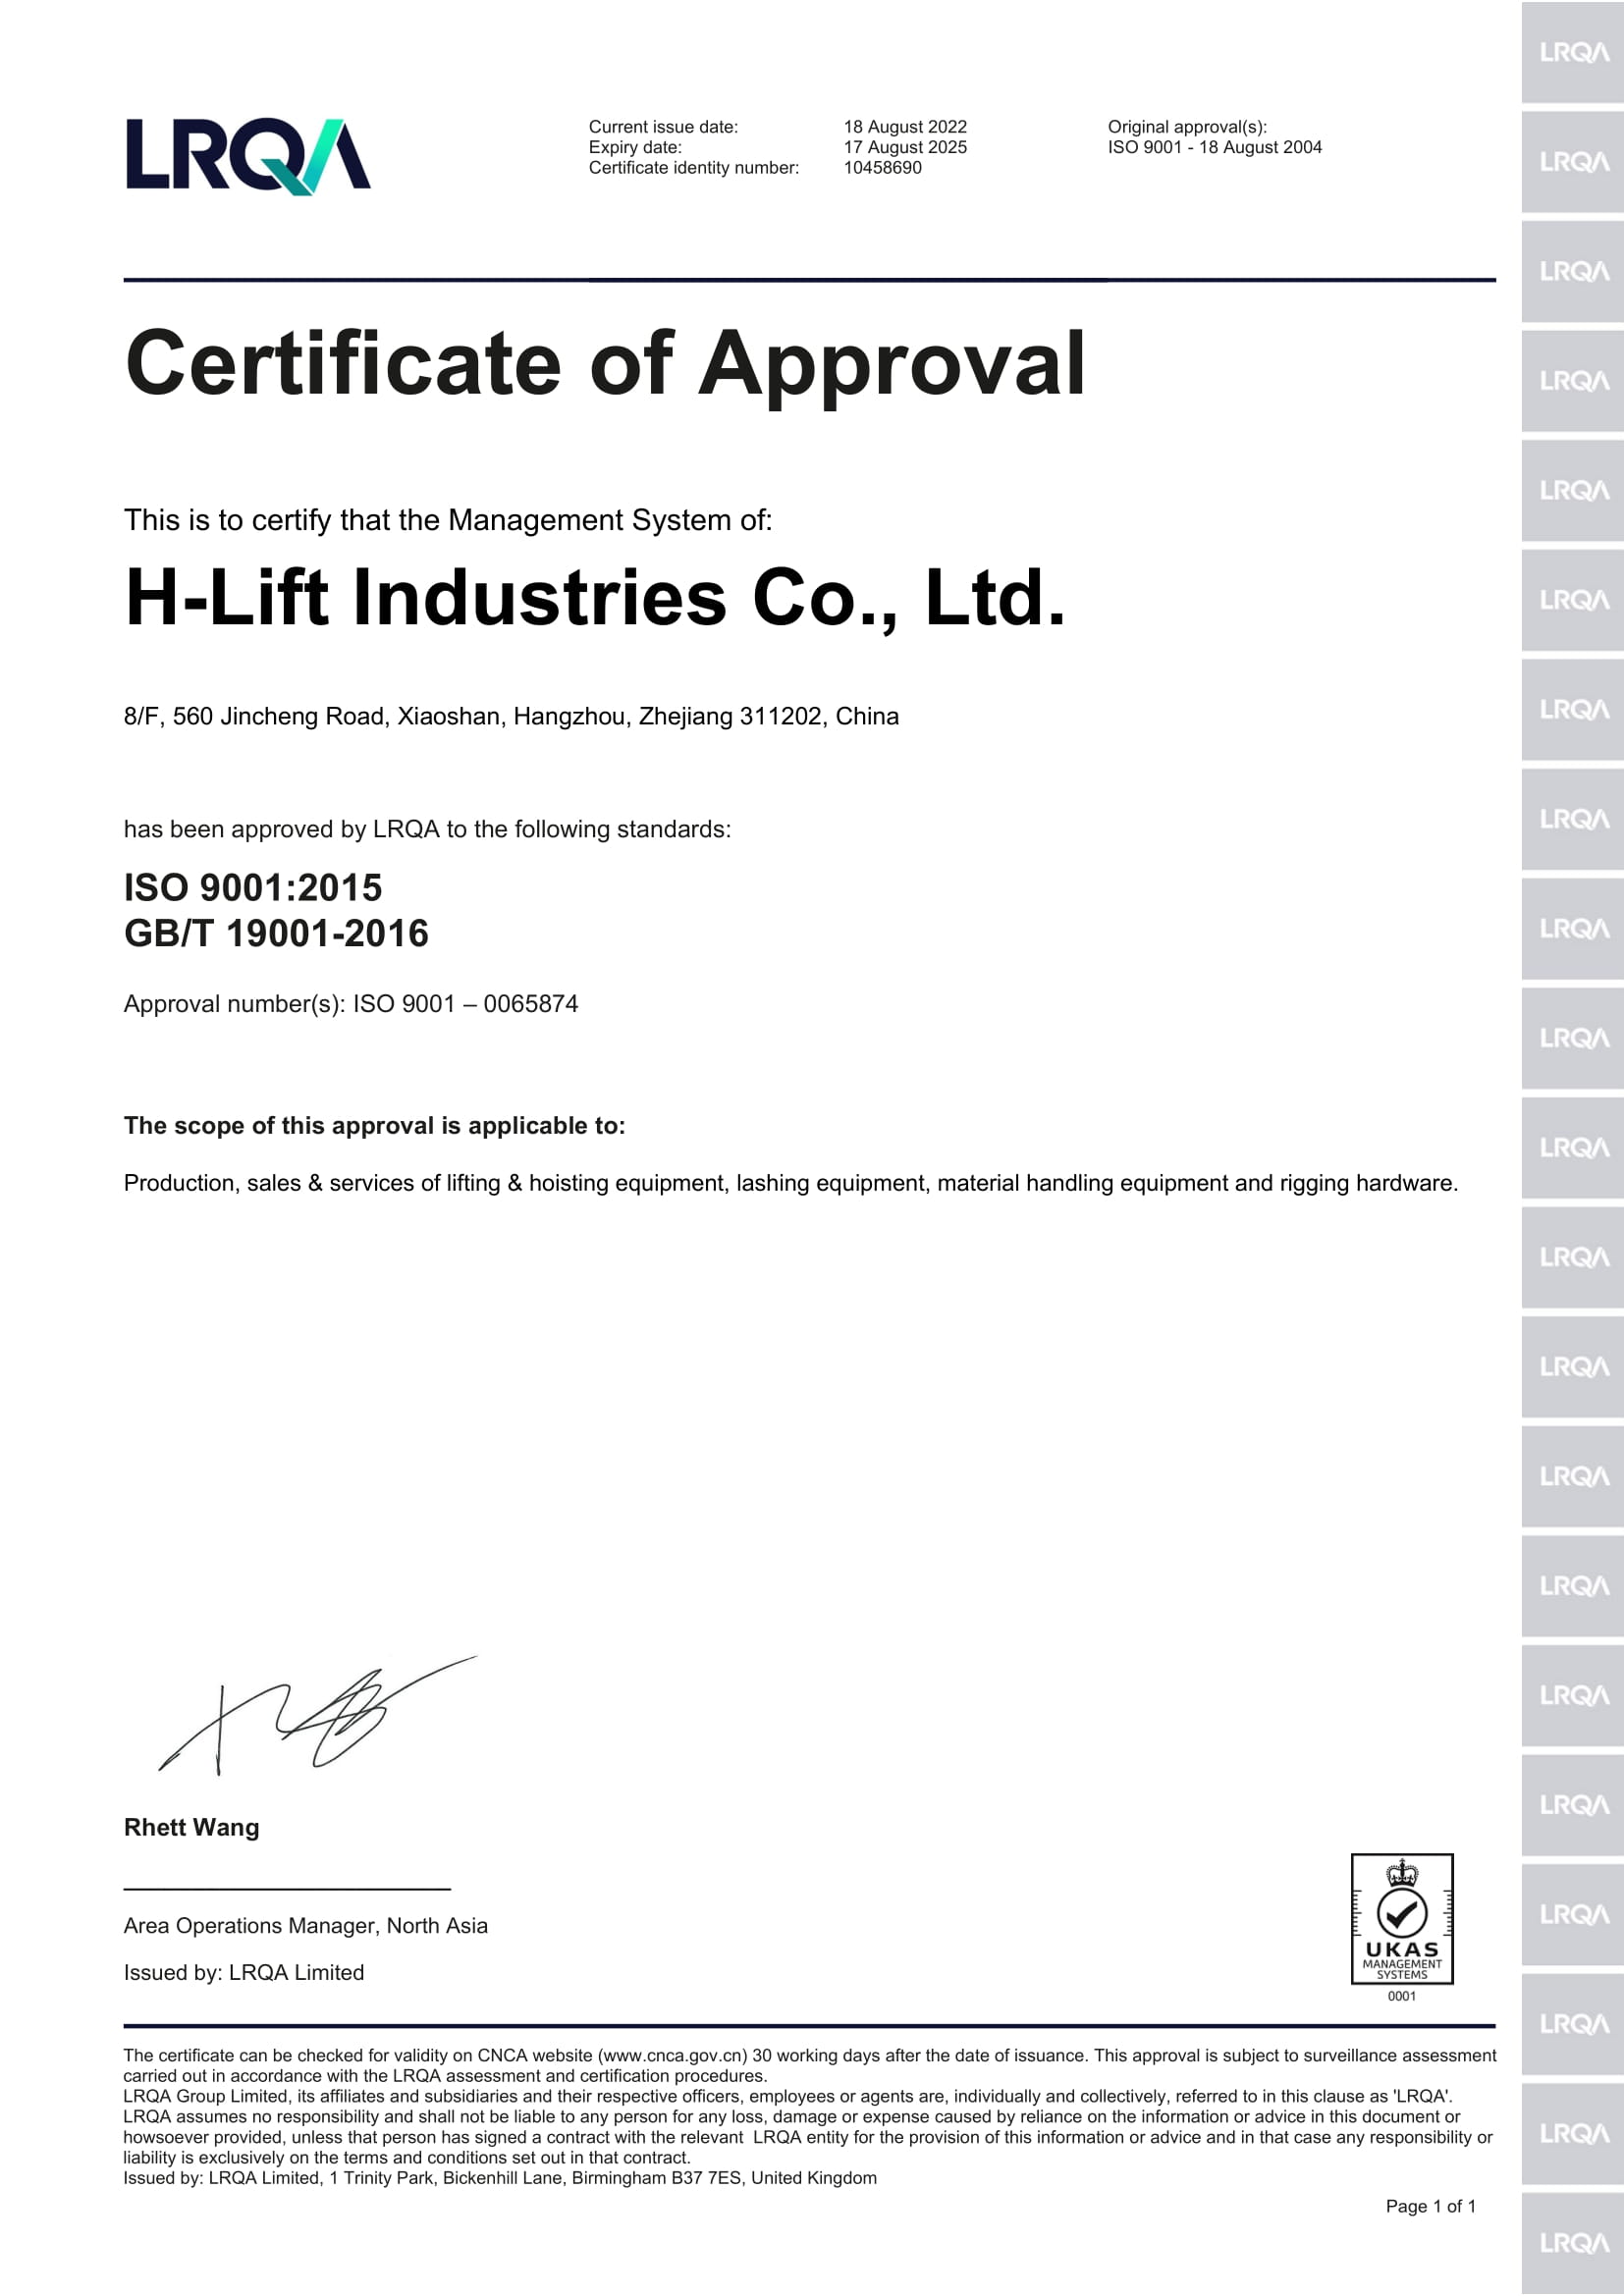 ISO 9001 Certiticate of Approval by LRQA